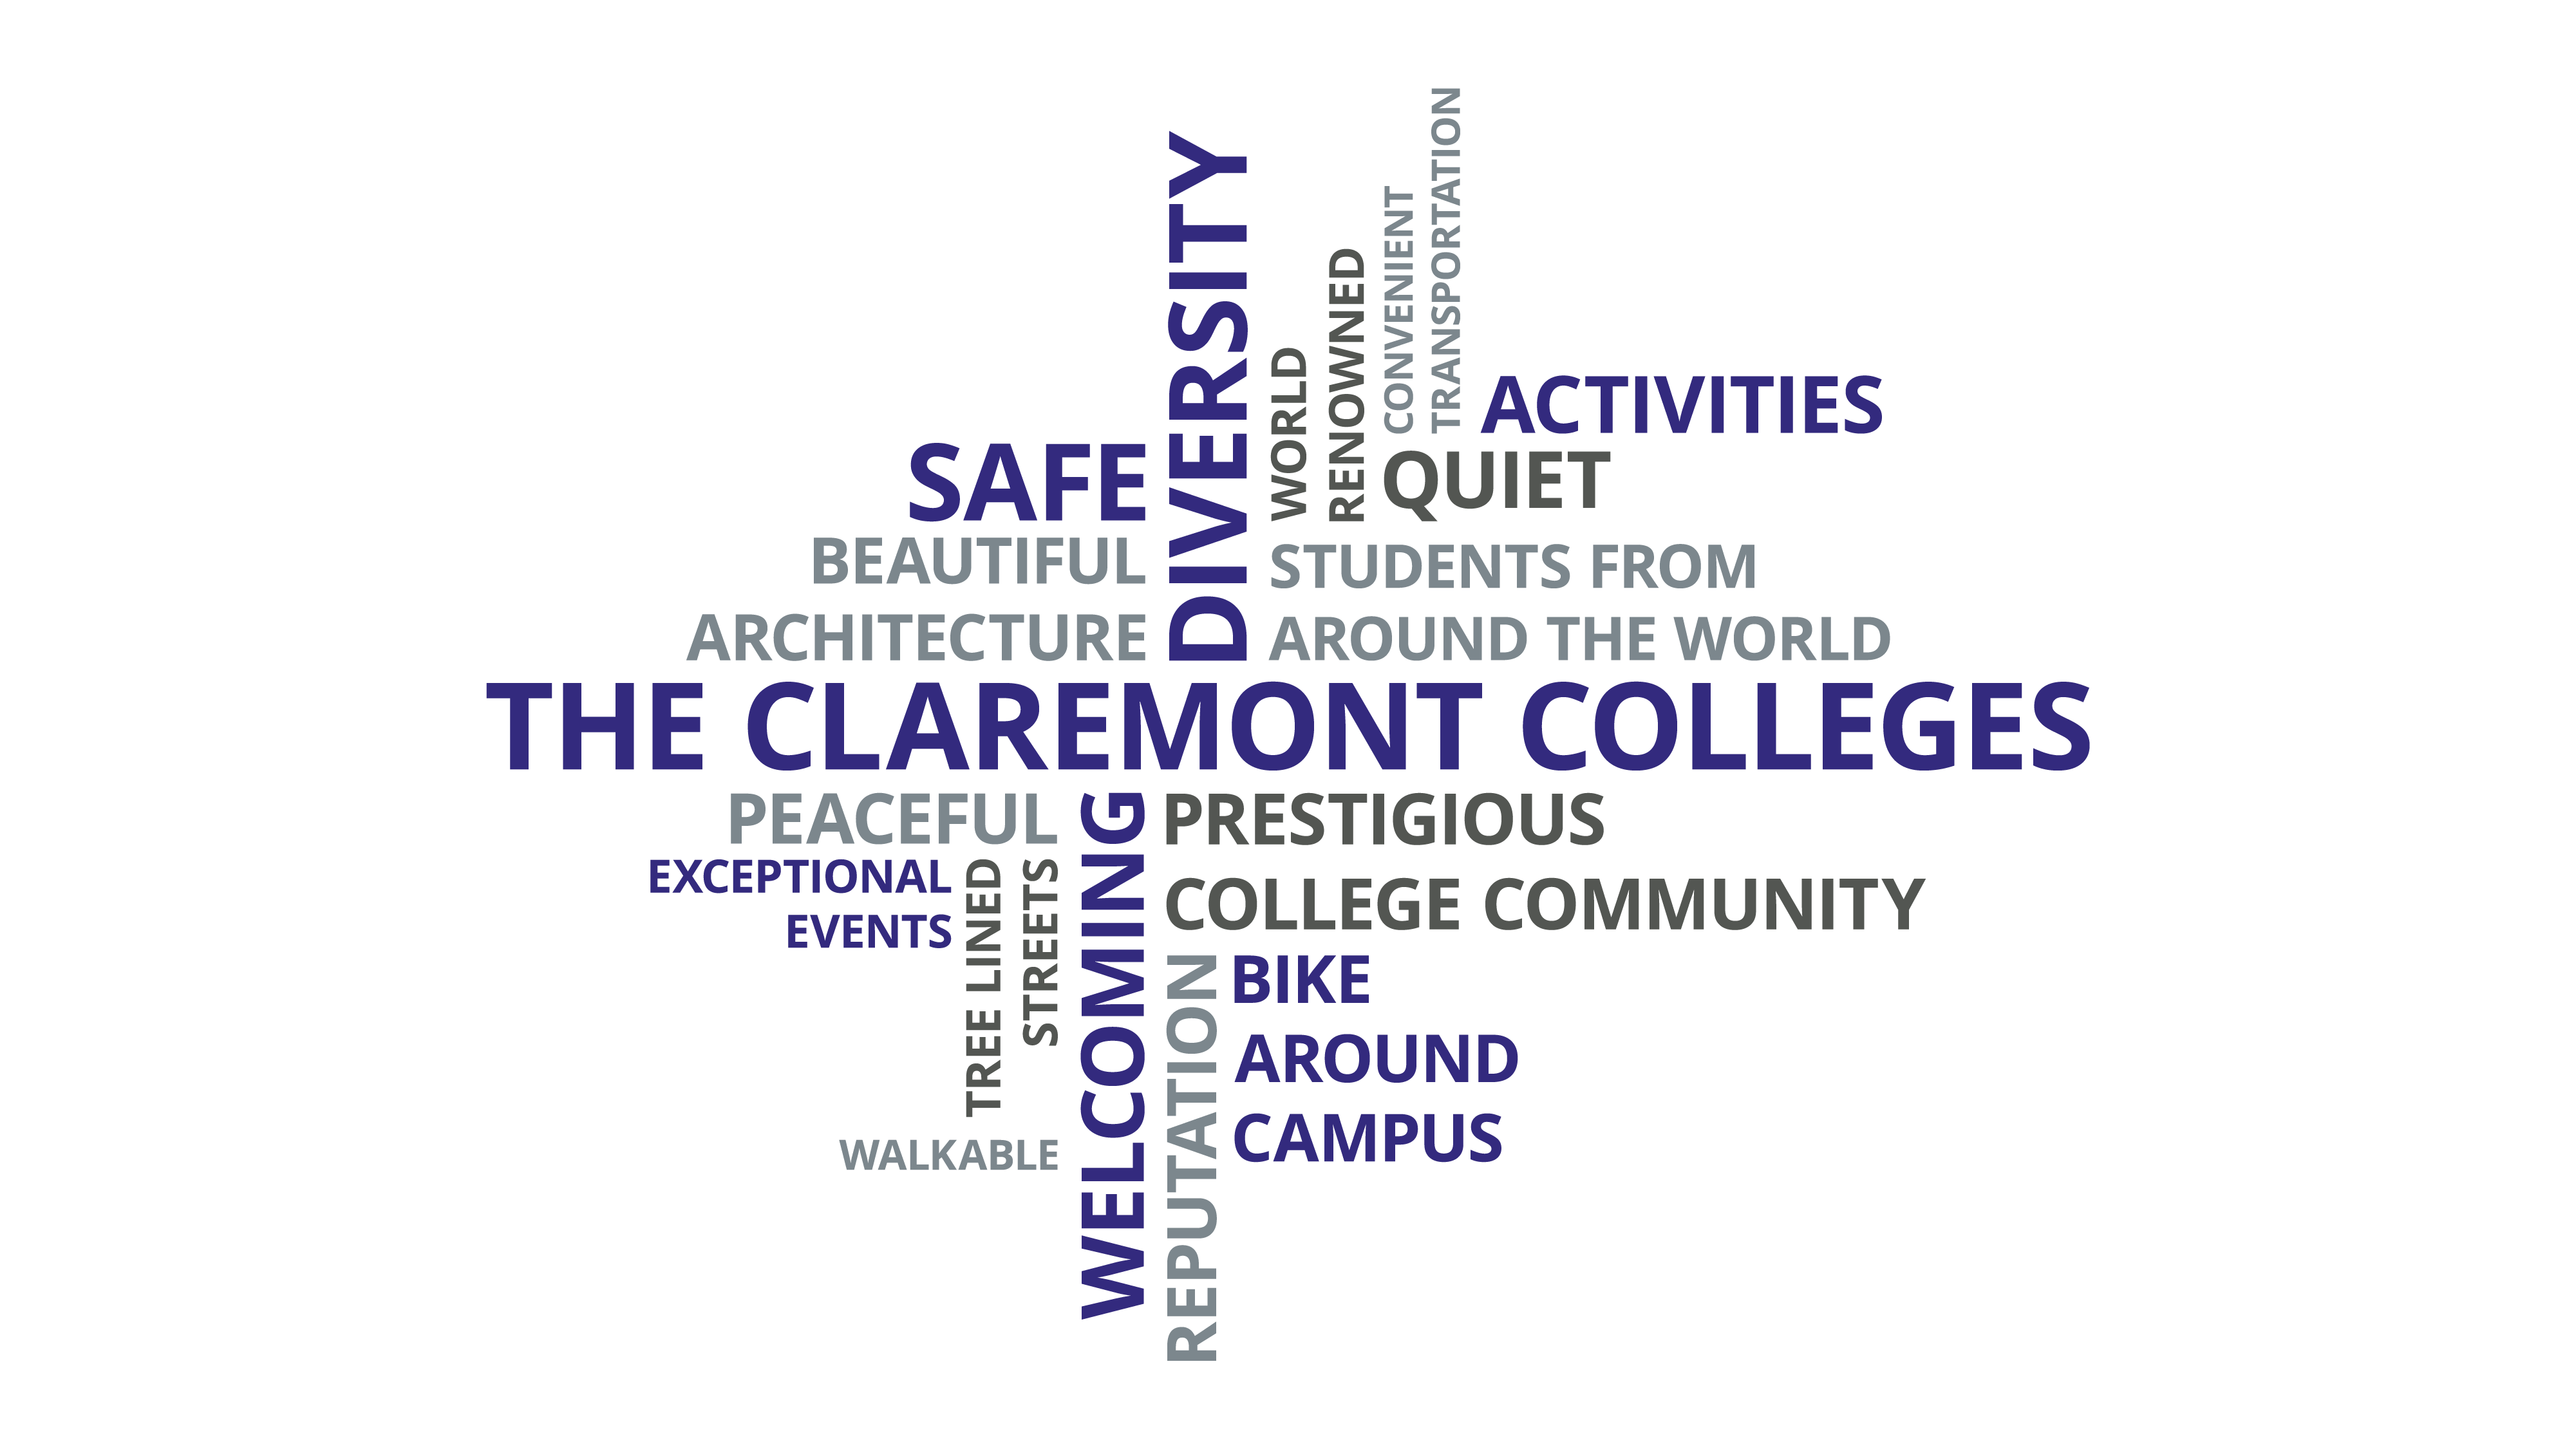 The Claremont Colleges word cloud